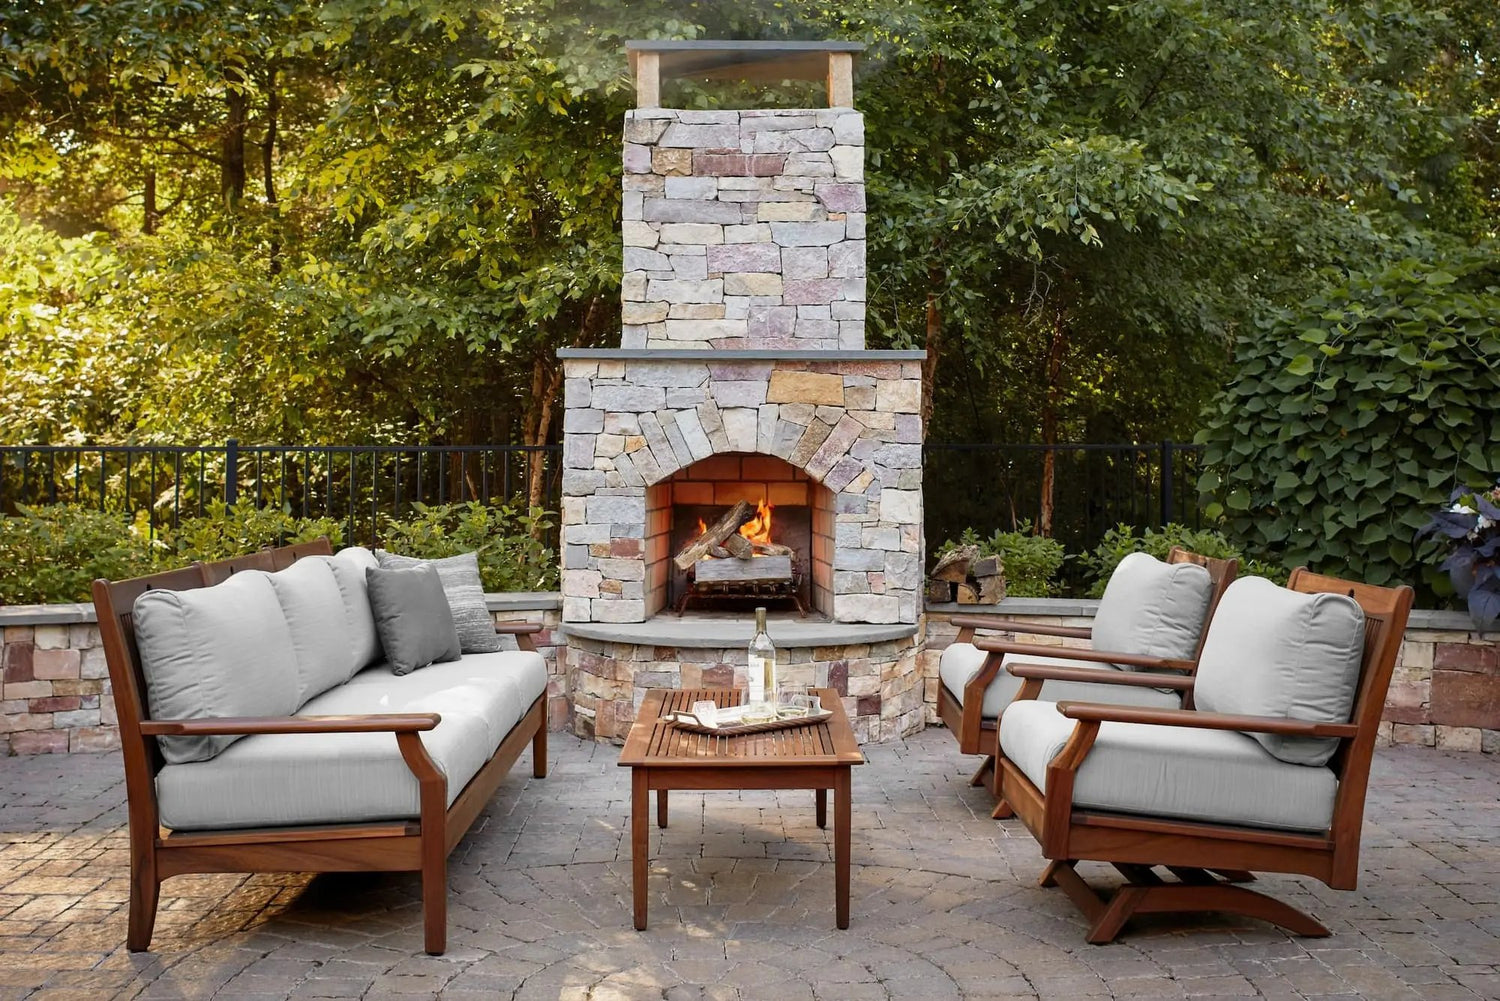 Create the perfect outdoor ambiance with a cozy patio featuring a fireplace and stylish furniture.